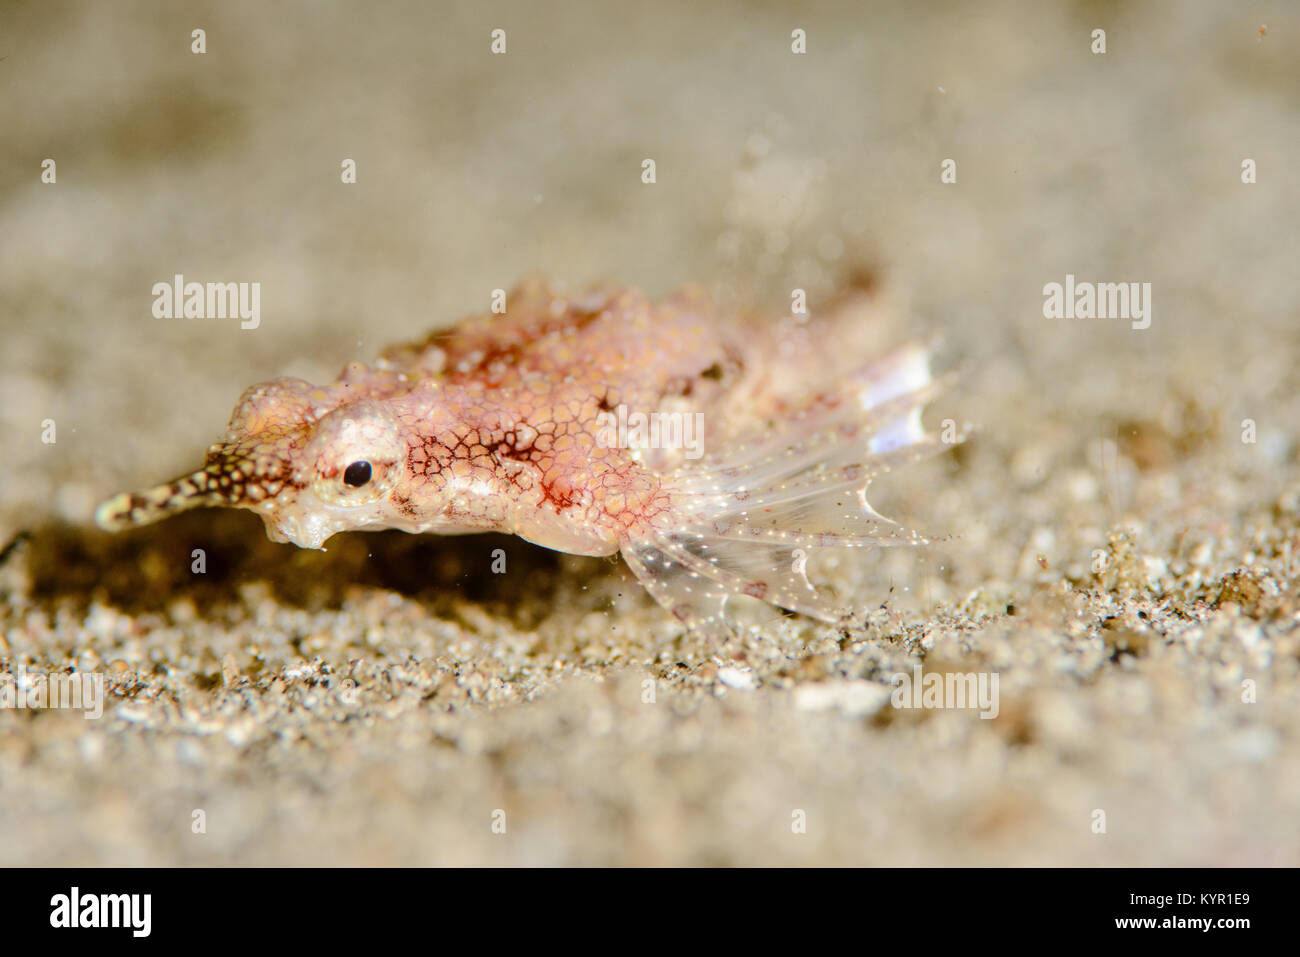 The pegasus sea moth is one of the strangest looking fish in the ocean. It likes to slowly crawl along the sandy bottoms. It is most active at nigh Stock Photo